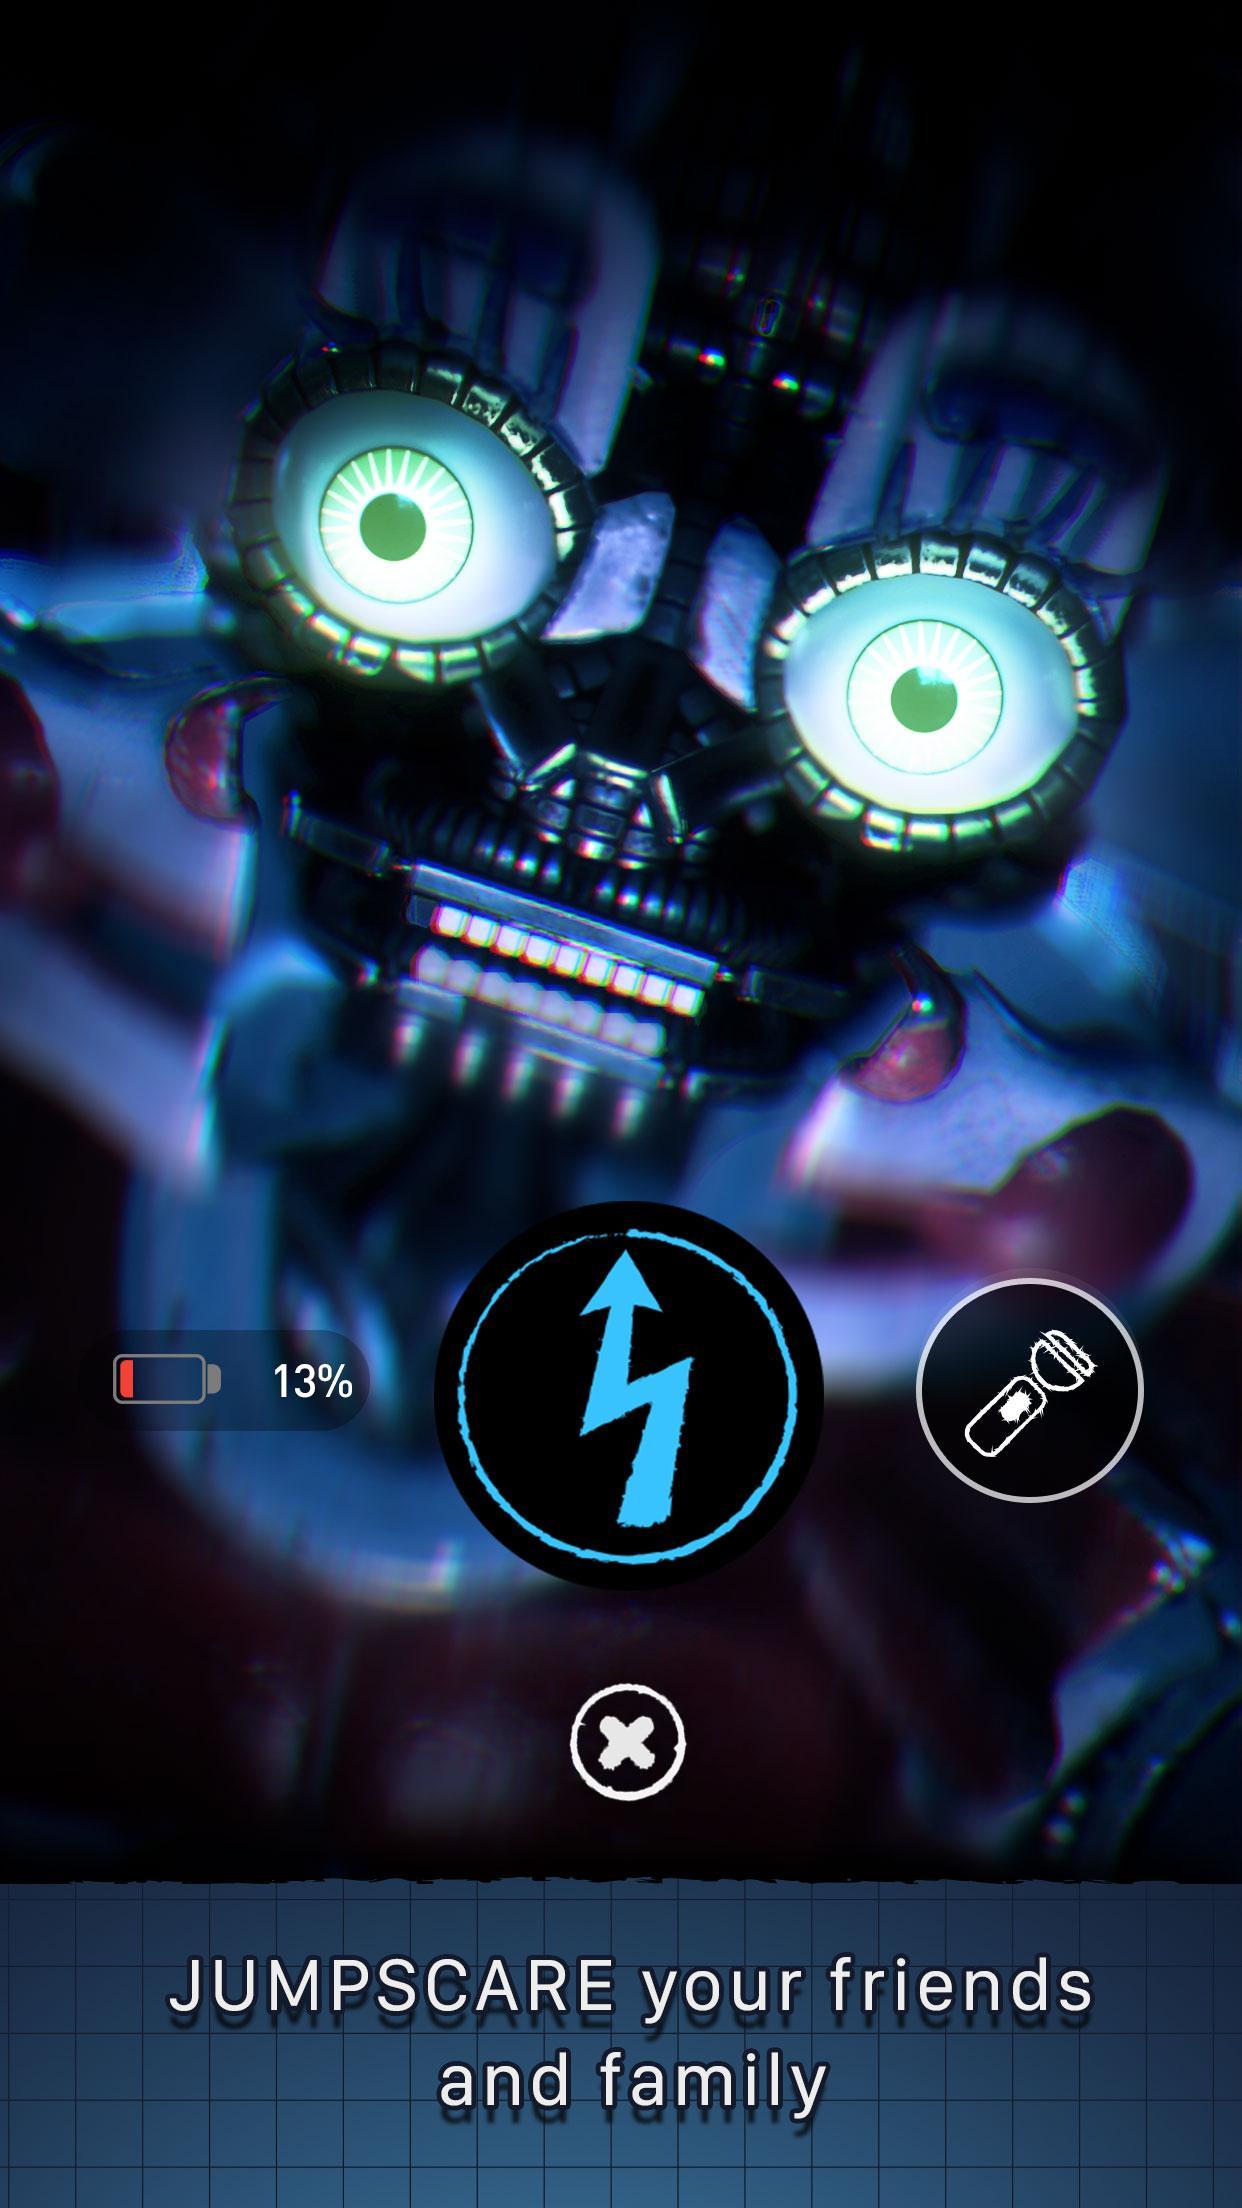 Five Nights at Freddy's AR 16.1.0 APK Download for Android (Latest Version)